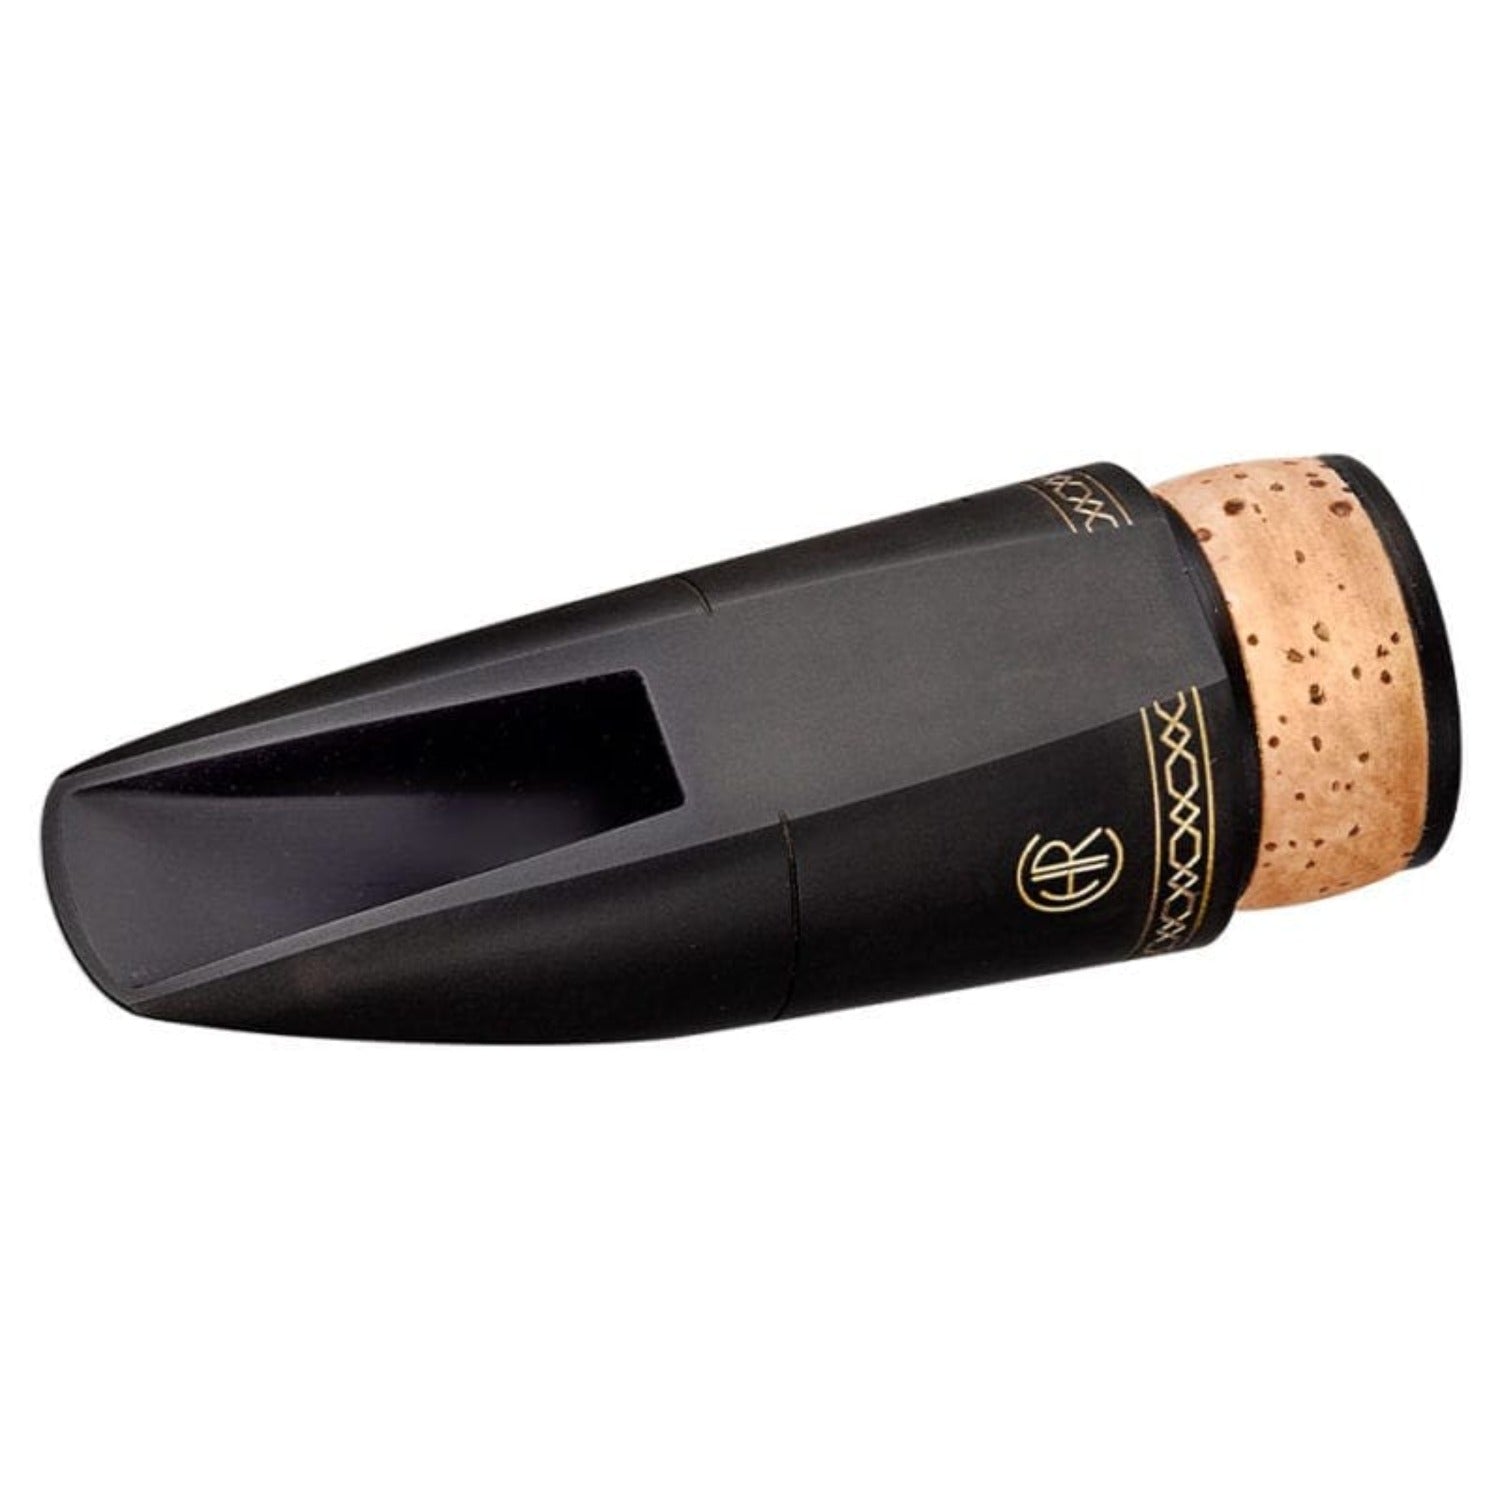 rear view of Chedeville bass clarinet mouthpiece showing table and window, with engraved gold border around the bottom and CHR logo